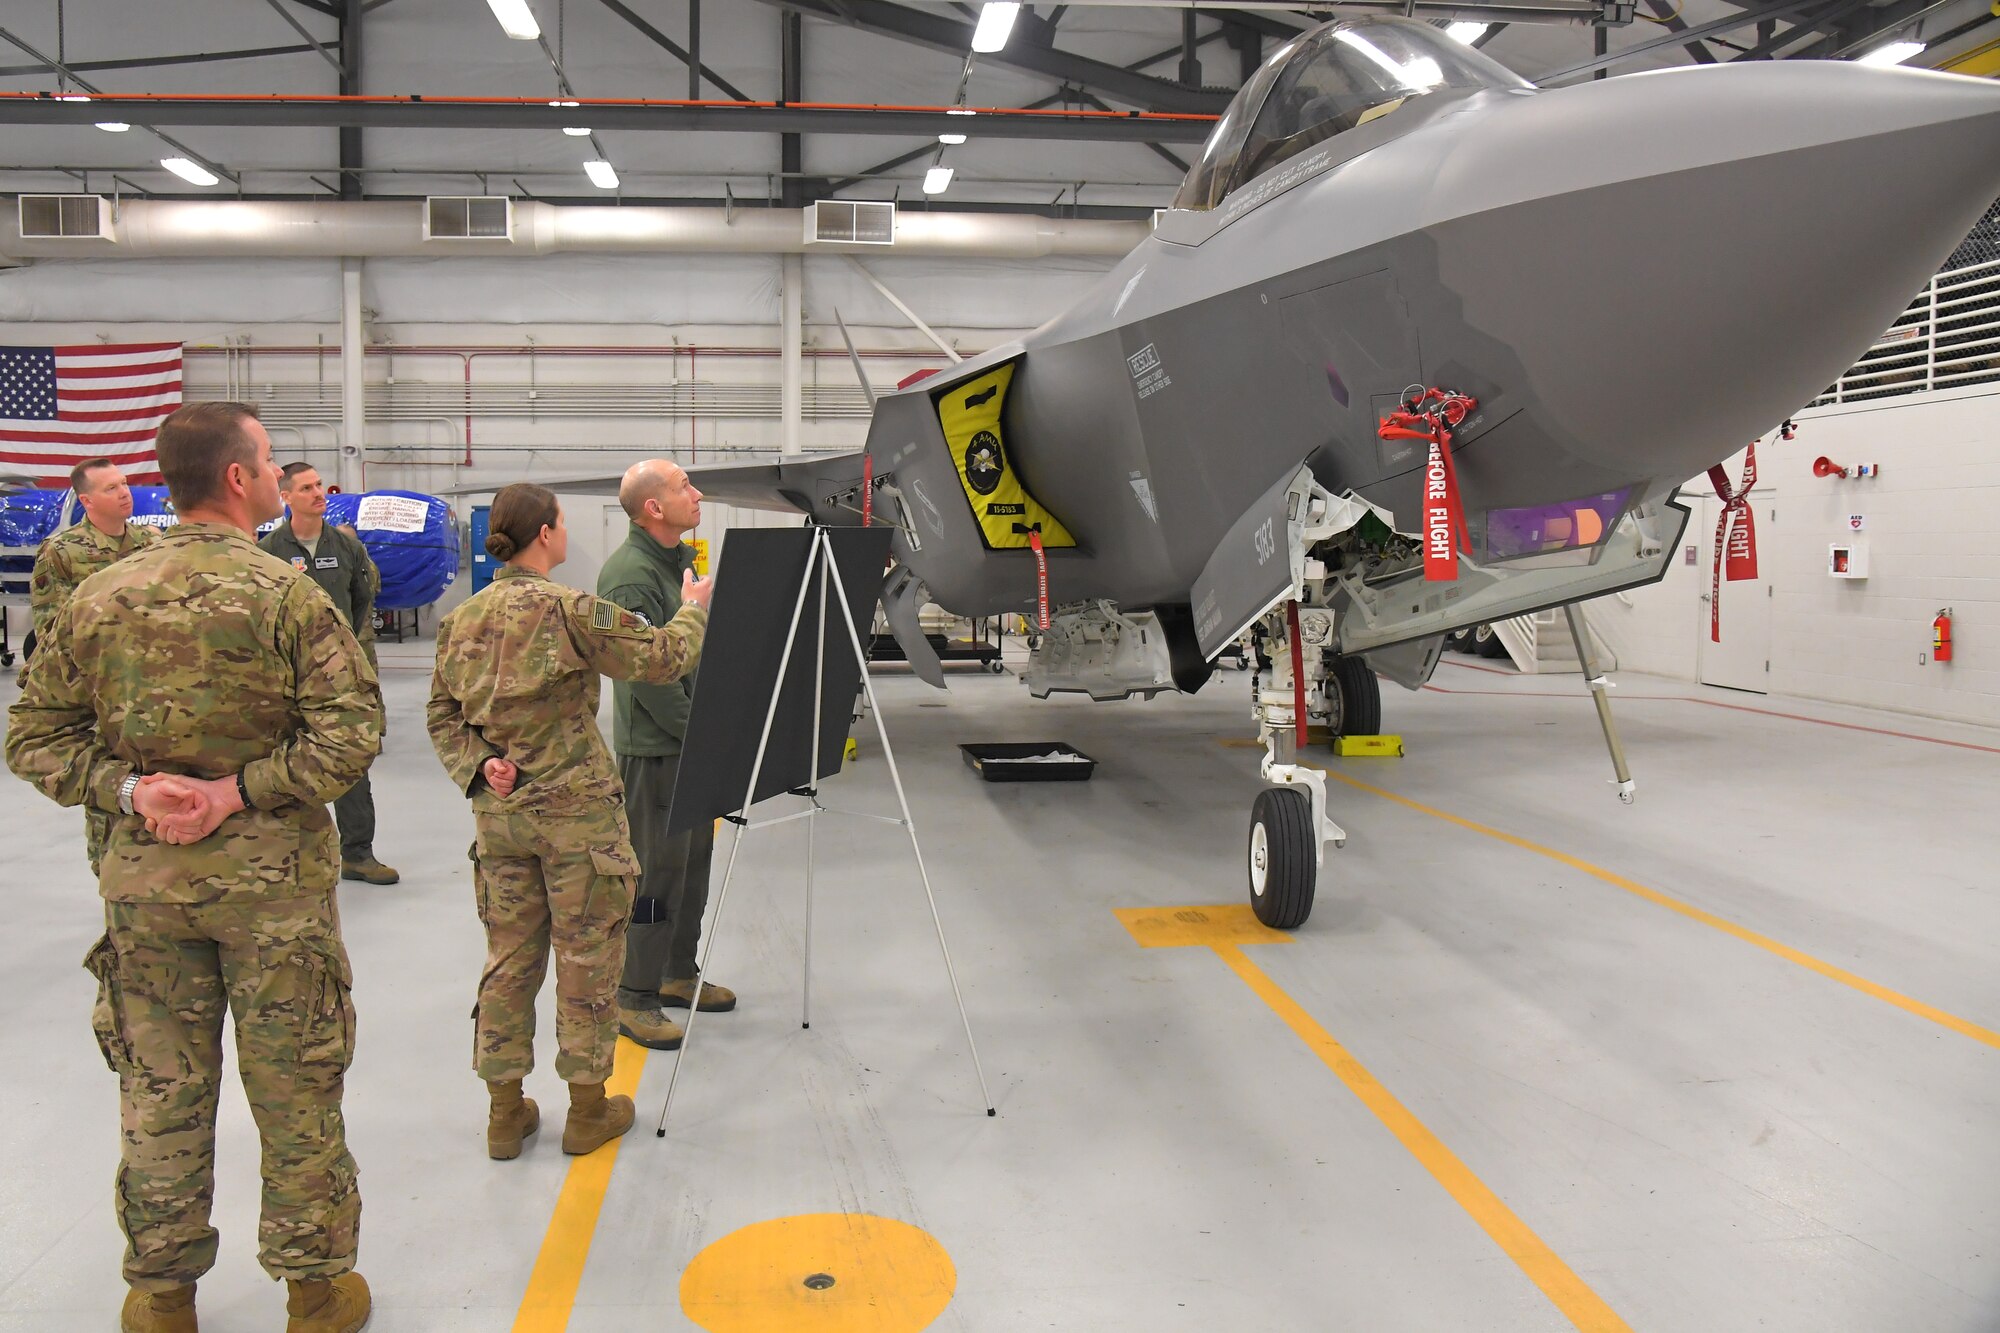 Gen. Mike Holmes, commander of Air Combat Command, is briefed about the status of the wing by Capt. Dayna Grant, 388th Aircraft Maintenance Squadron, during a visit to the 388th Fighter Wing March 26, 2019, at Hill Air Force Base, Utah. (U.S. Air Force photo by Todd Cromar)